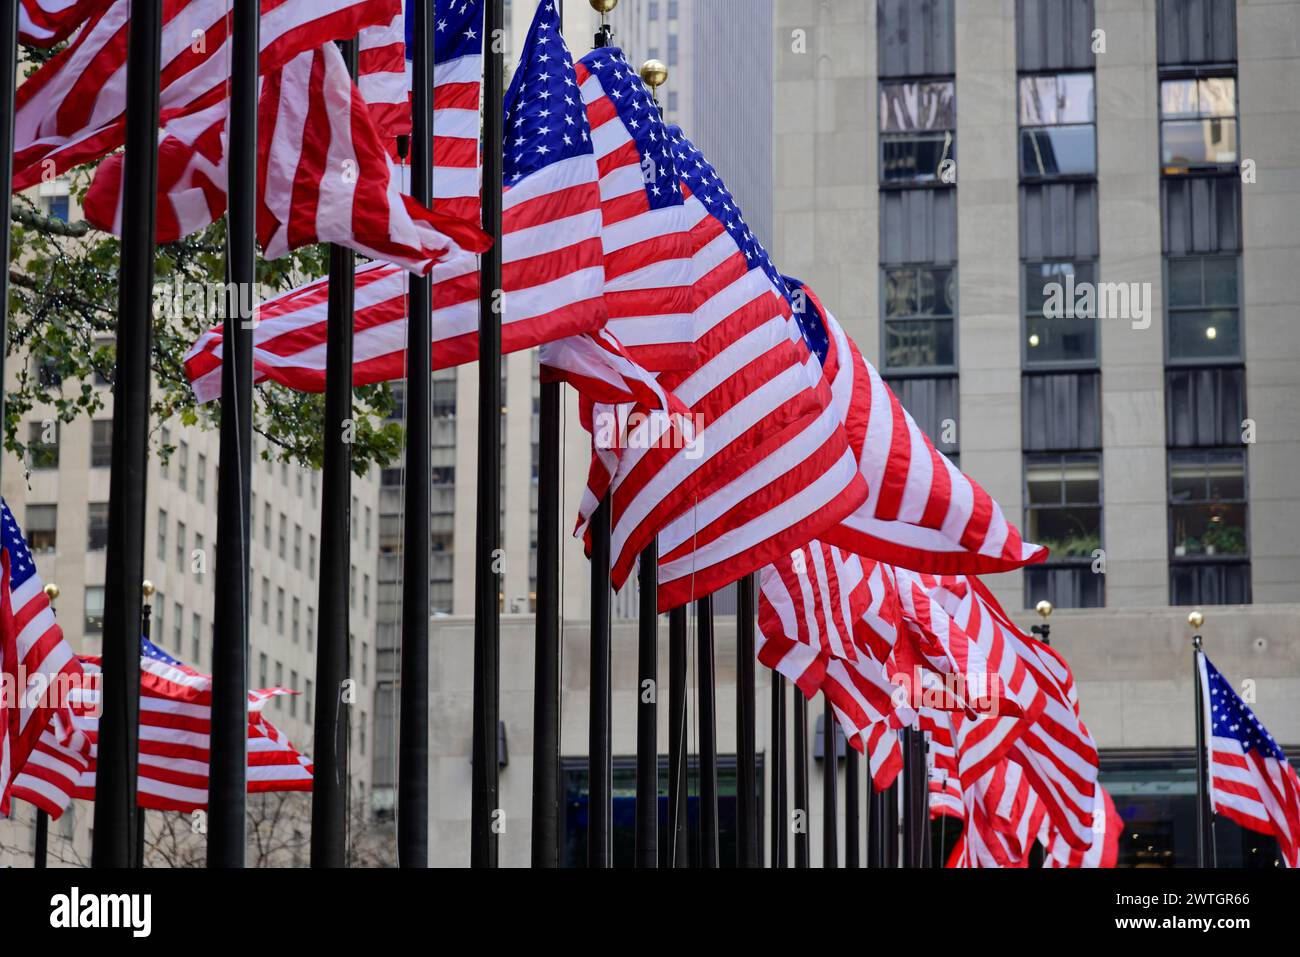 Rockfeller Center, Several US flags in a row in front of the entrance of a municipal building, Manhattan, New York City, New York, USA, North America Stock Photo